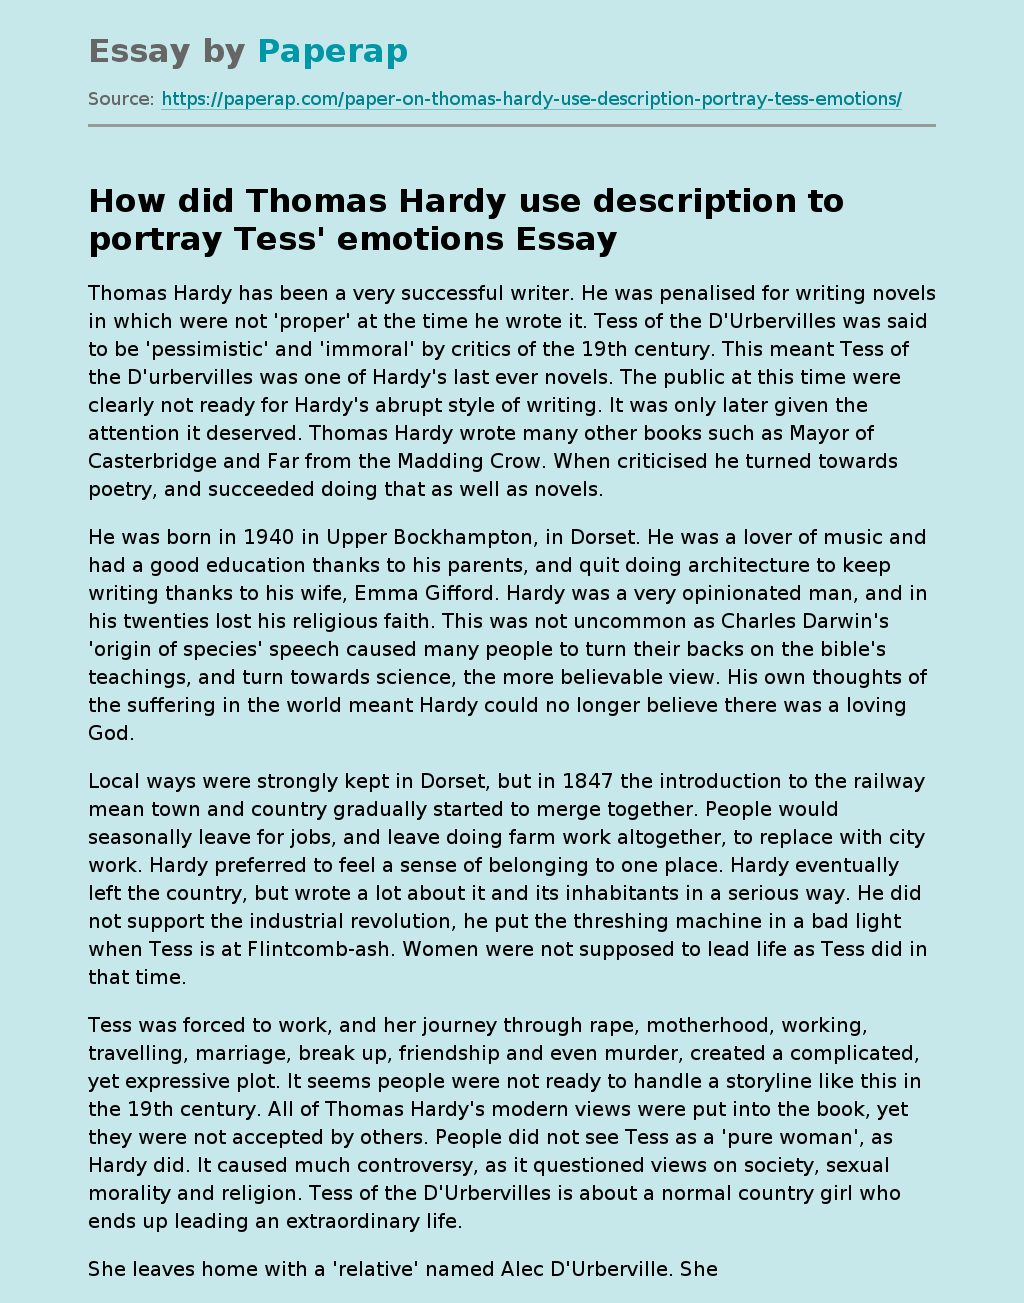 How did Thomas Hardy use description to portray Tess' emotions